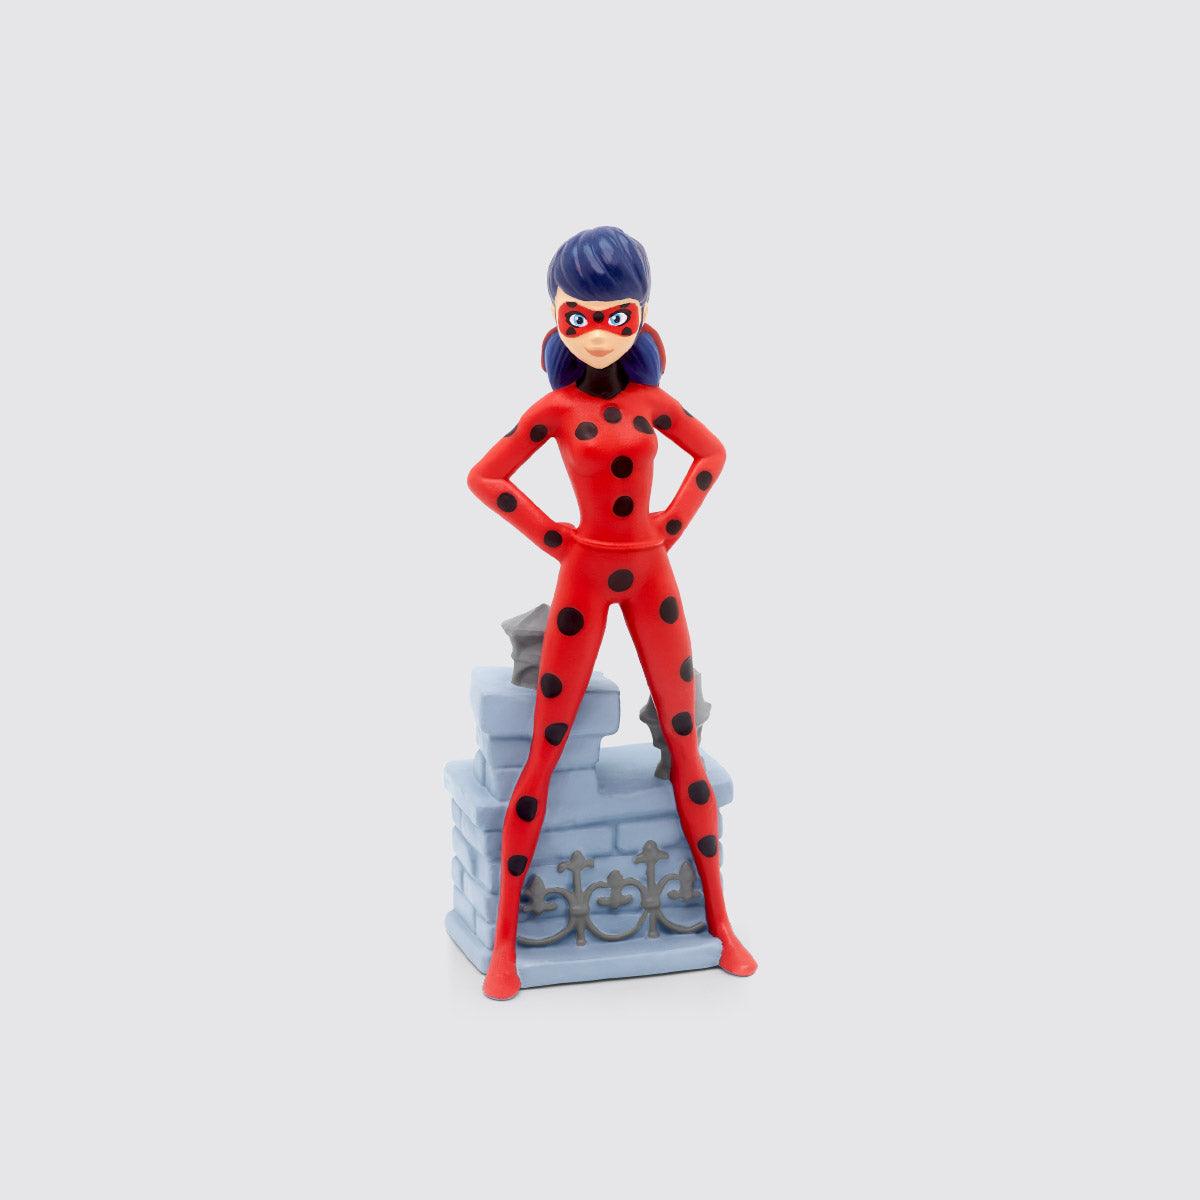 Miraculous RP: Ladybug & Chat Noir Update 12 Notes, by Miraculous RP News